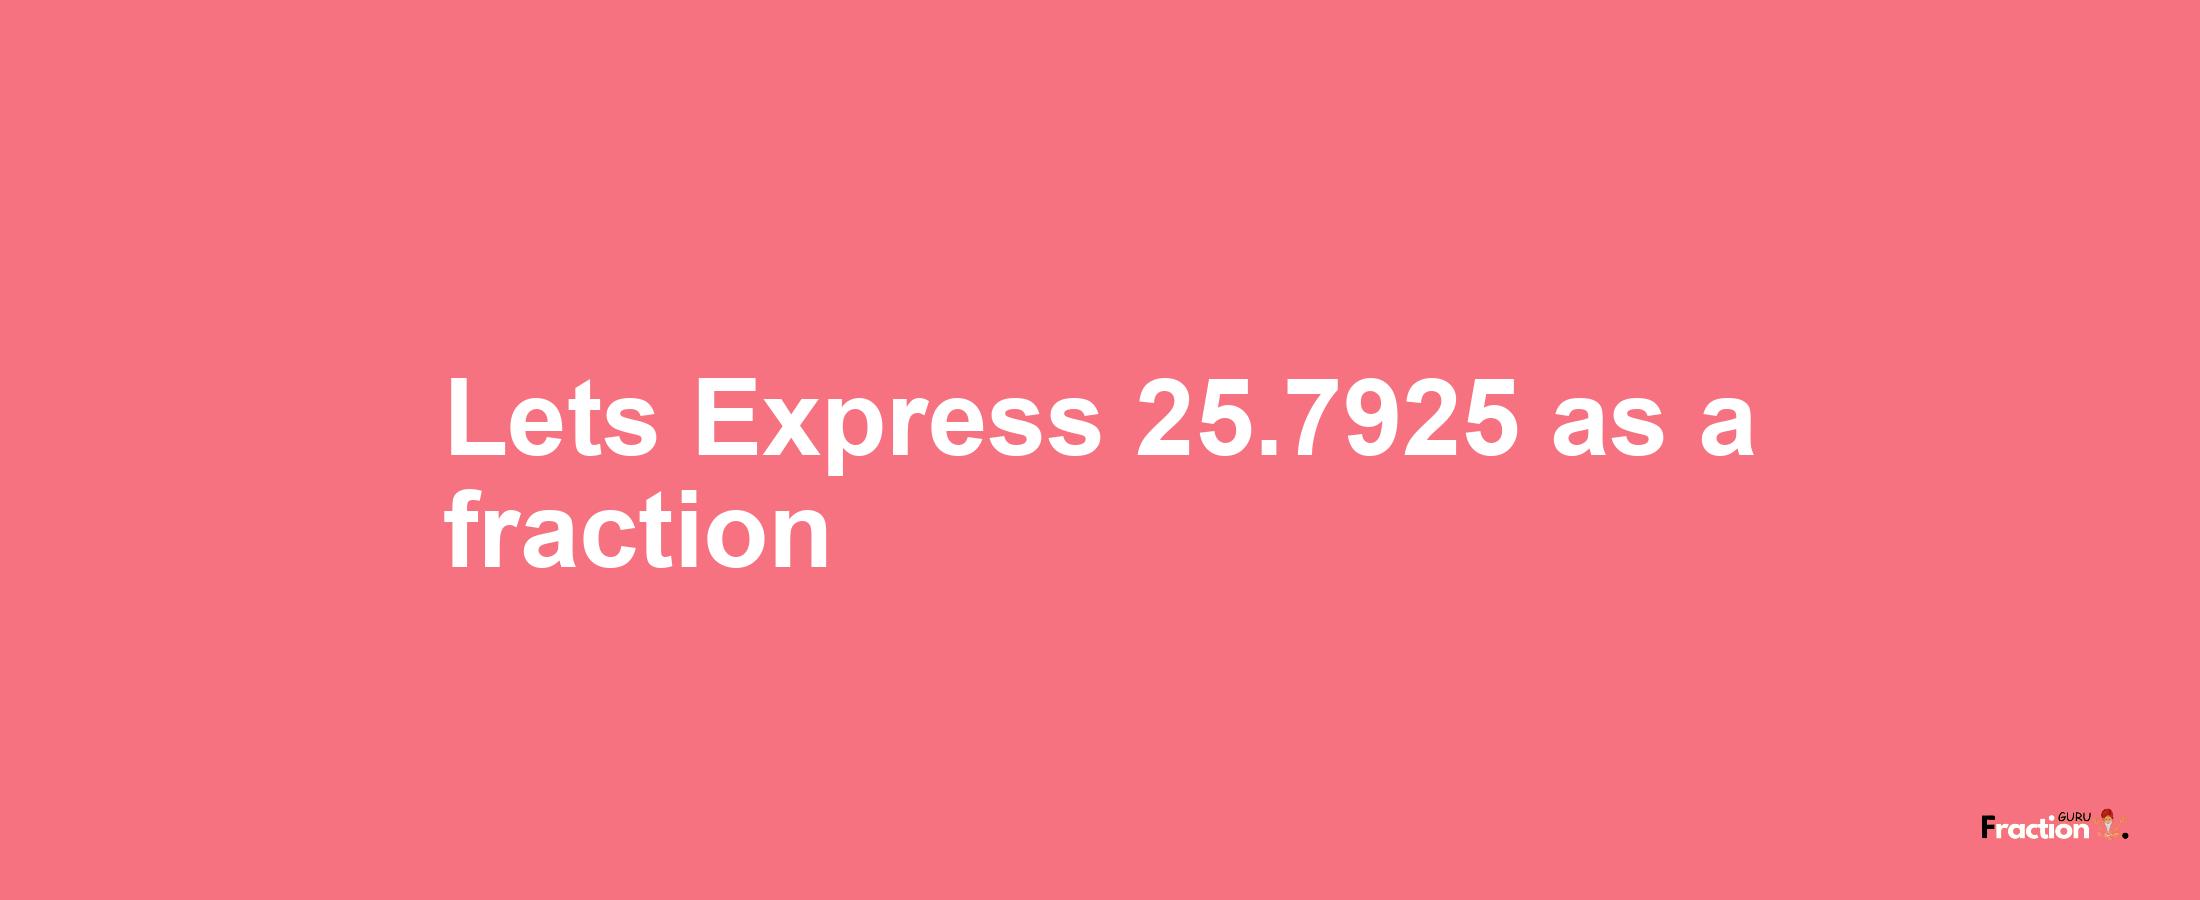 Lets Express 25.7925 as afraction